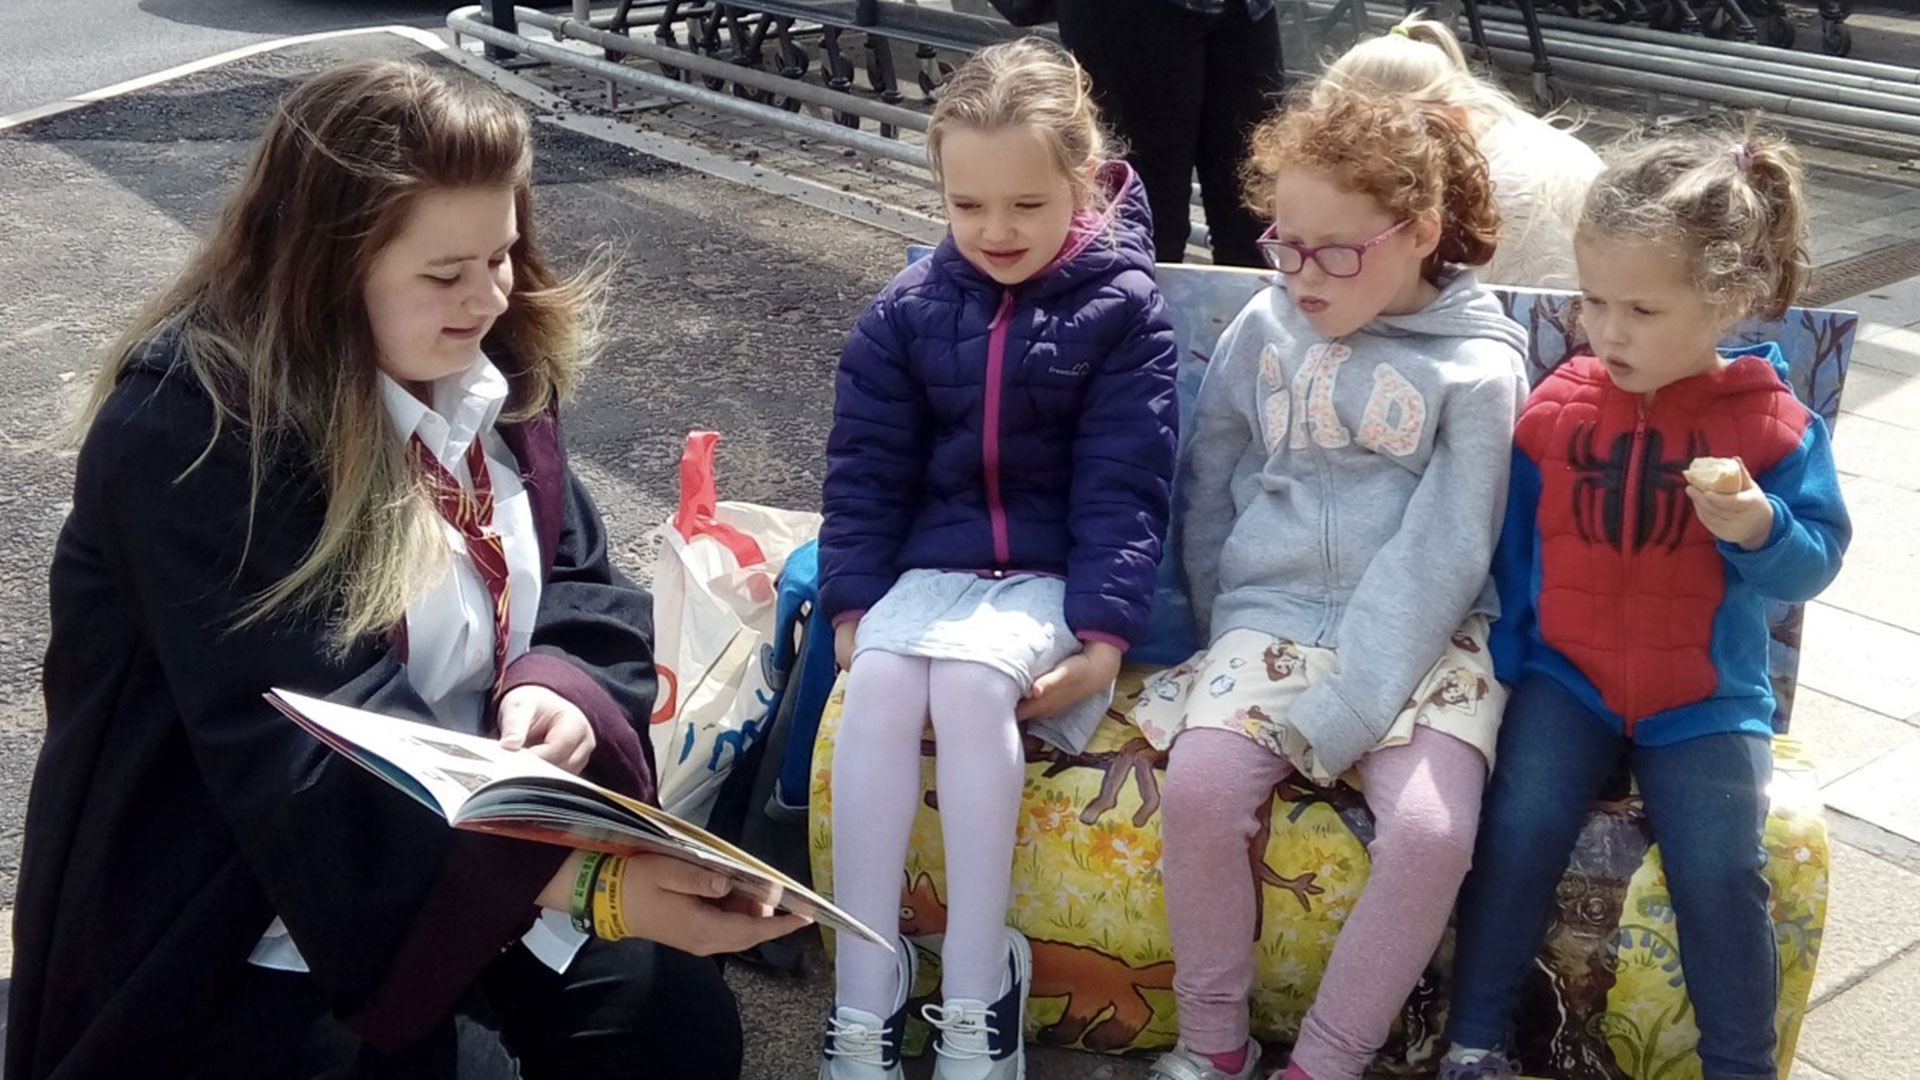 Children-sitting-on-a-decorated-bench-listening-to-someone-reading-a-story